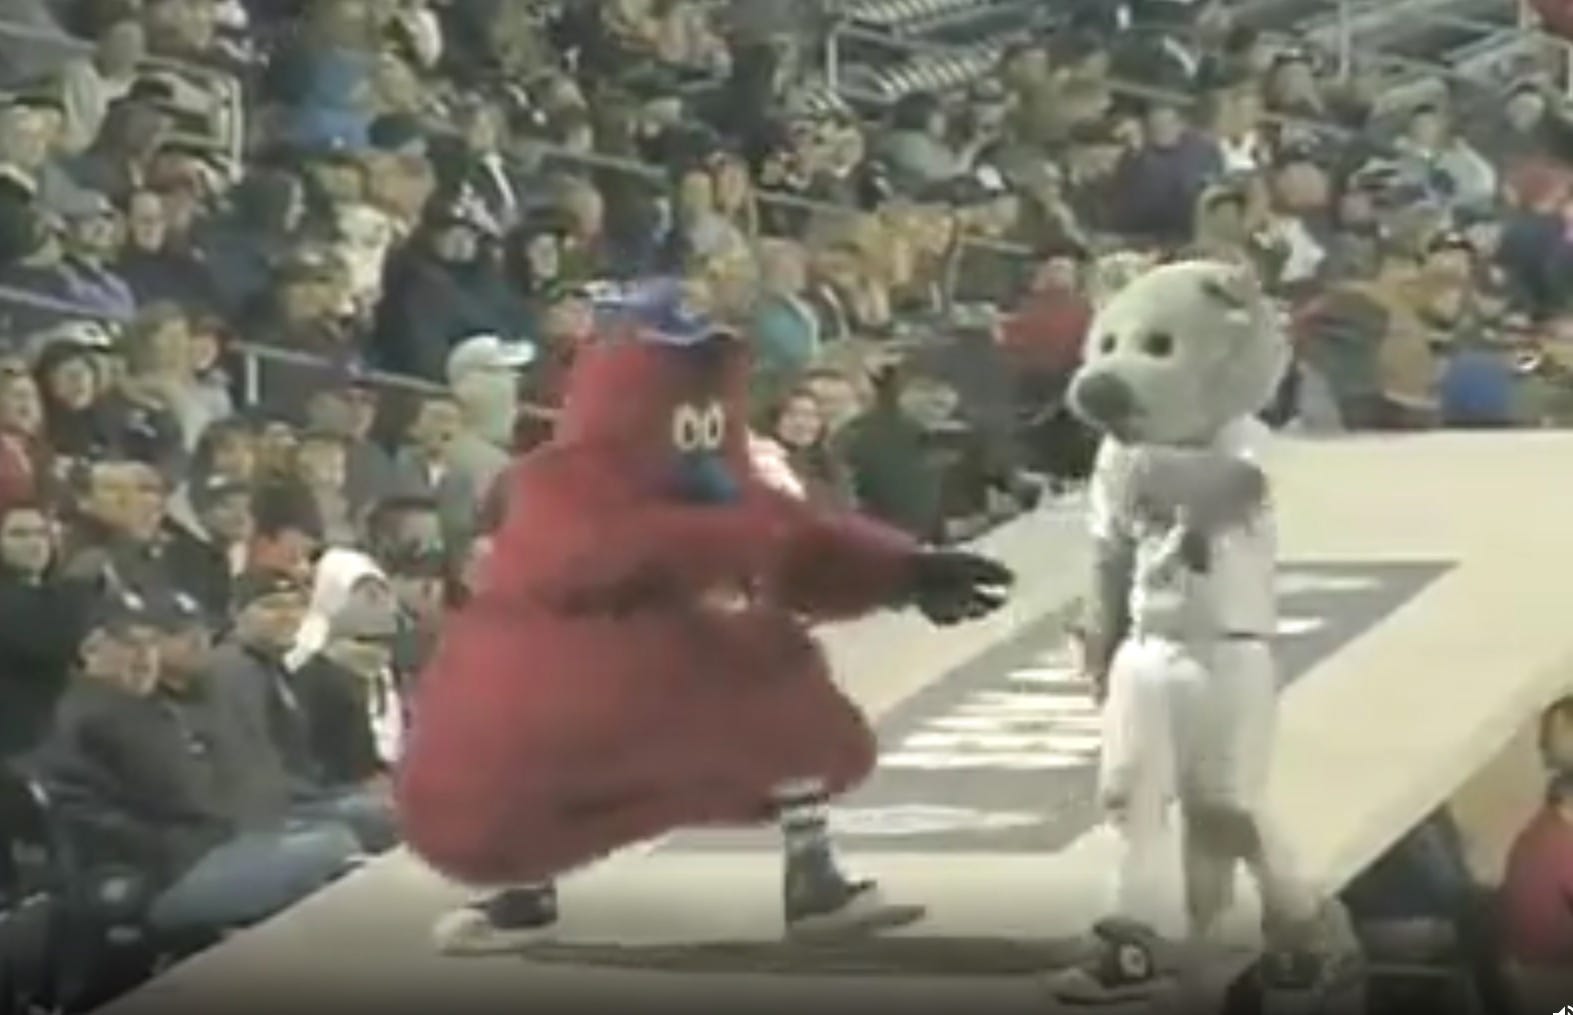 From 2010: Nevada Wolf Pack mascot falls off Reno Aces dugout